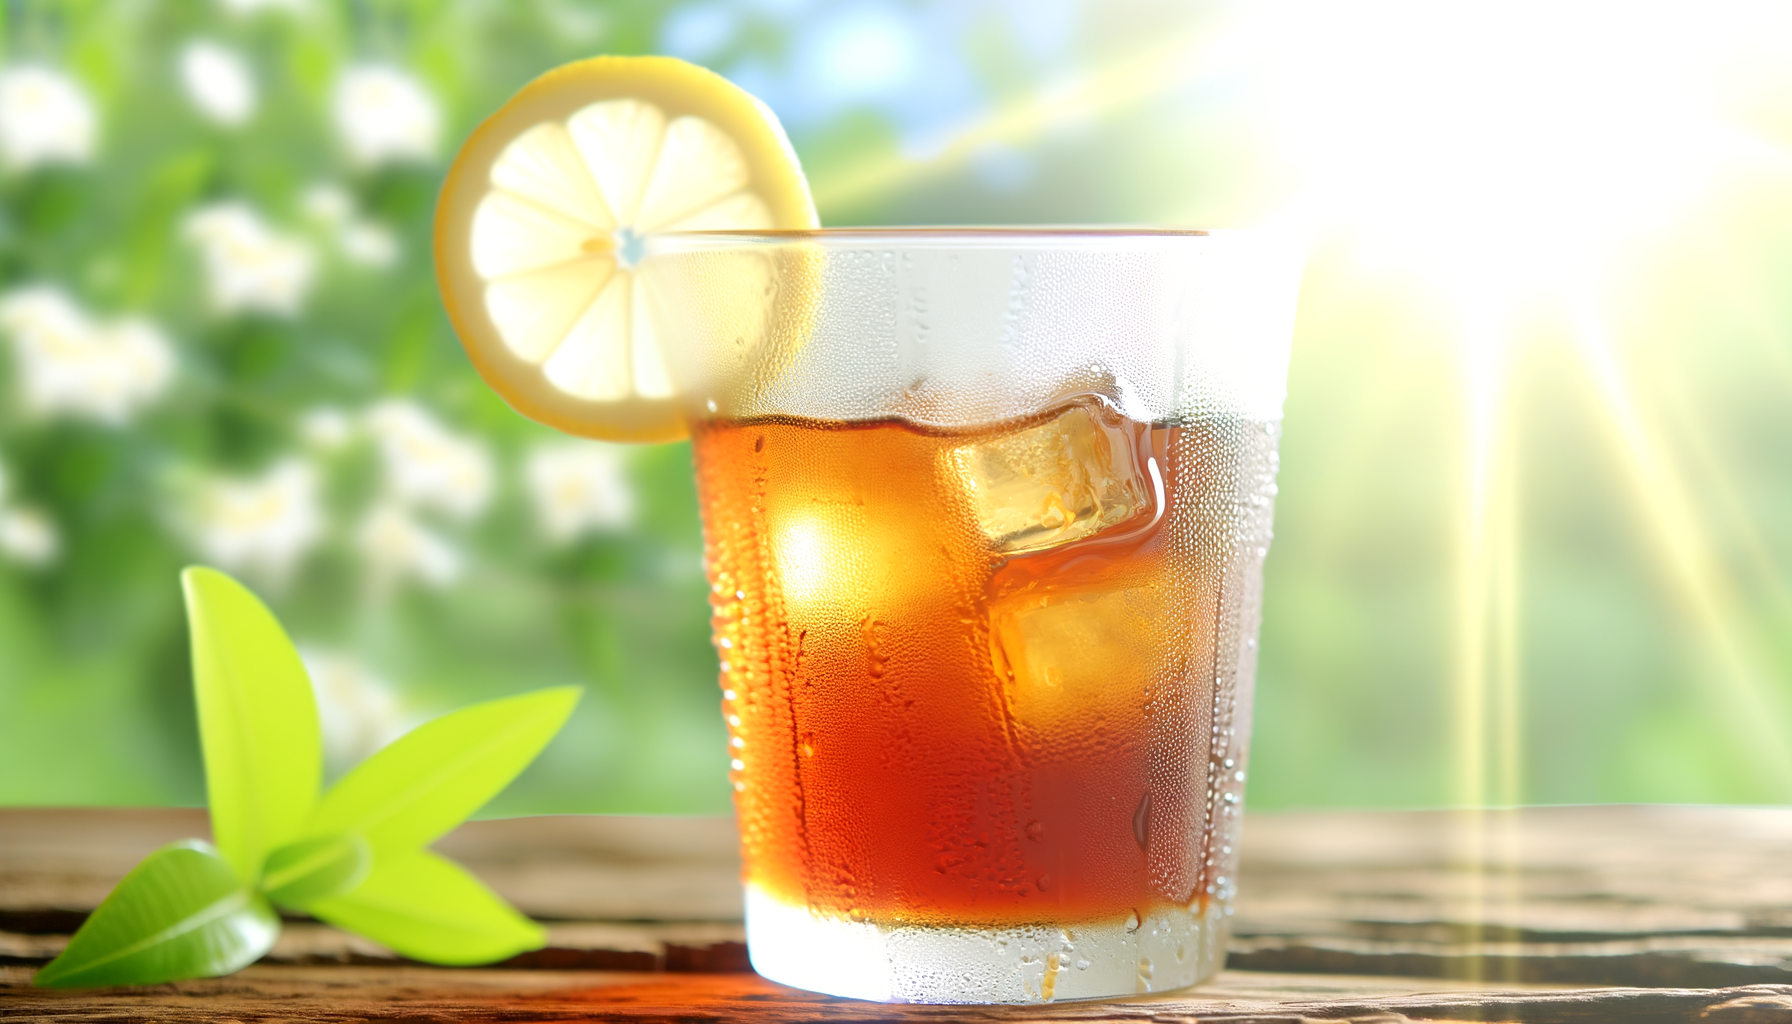 Amber sweet tea in a glass with lemon, on a wooden table against a backdrop of sunlit leaves.